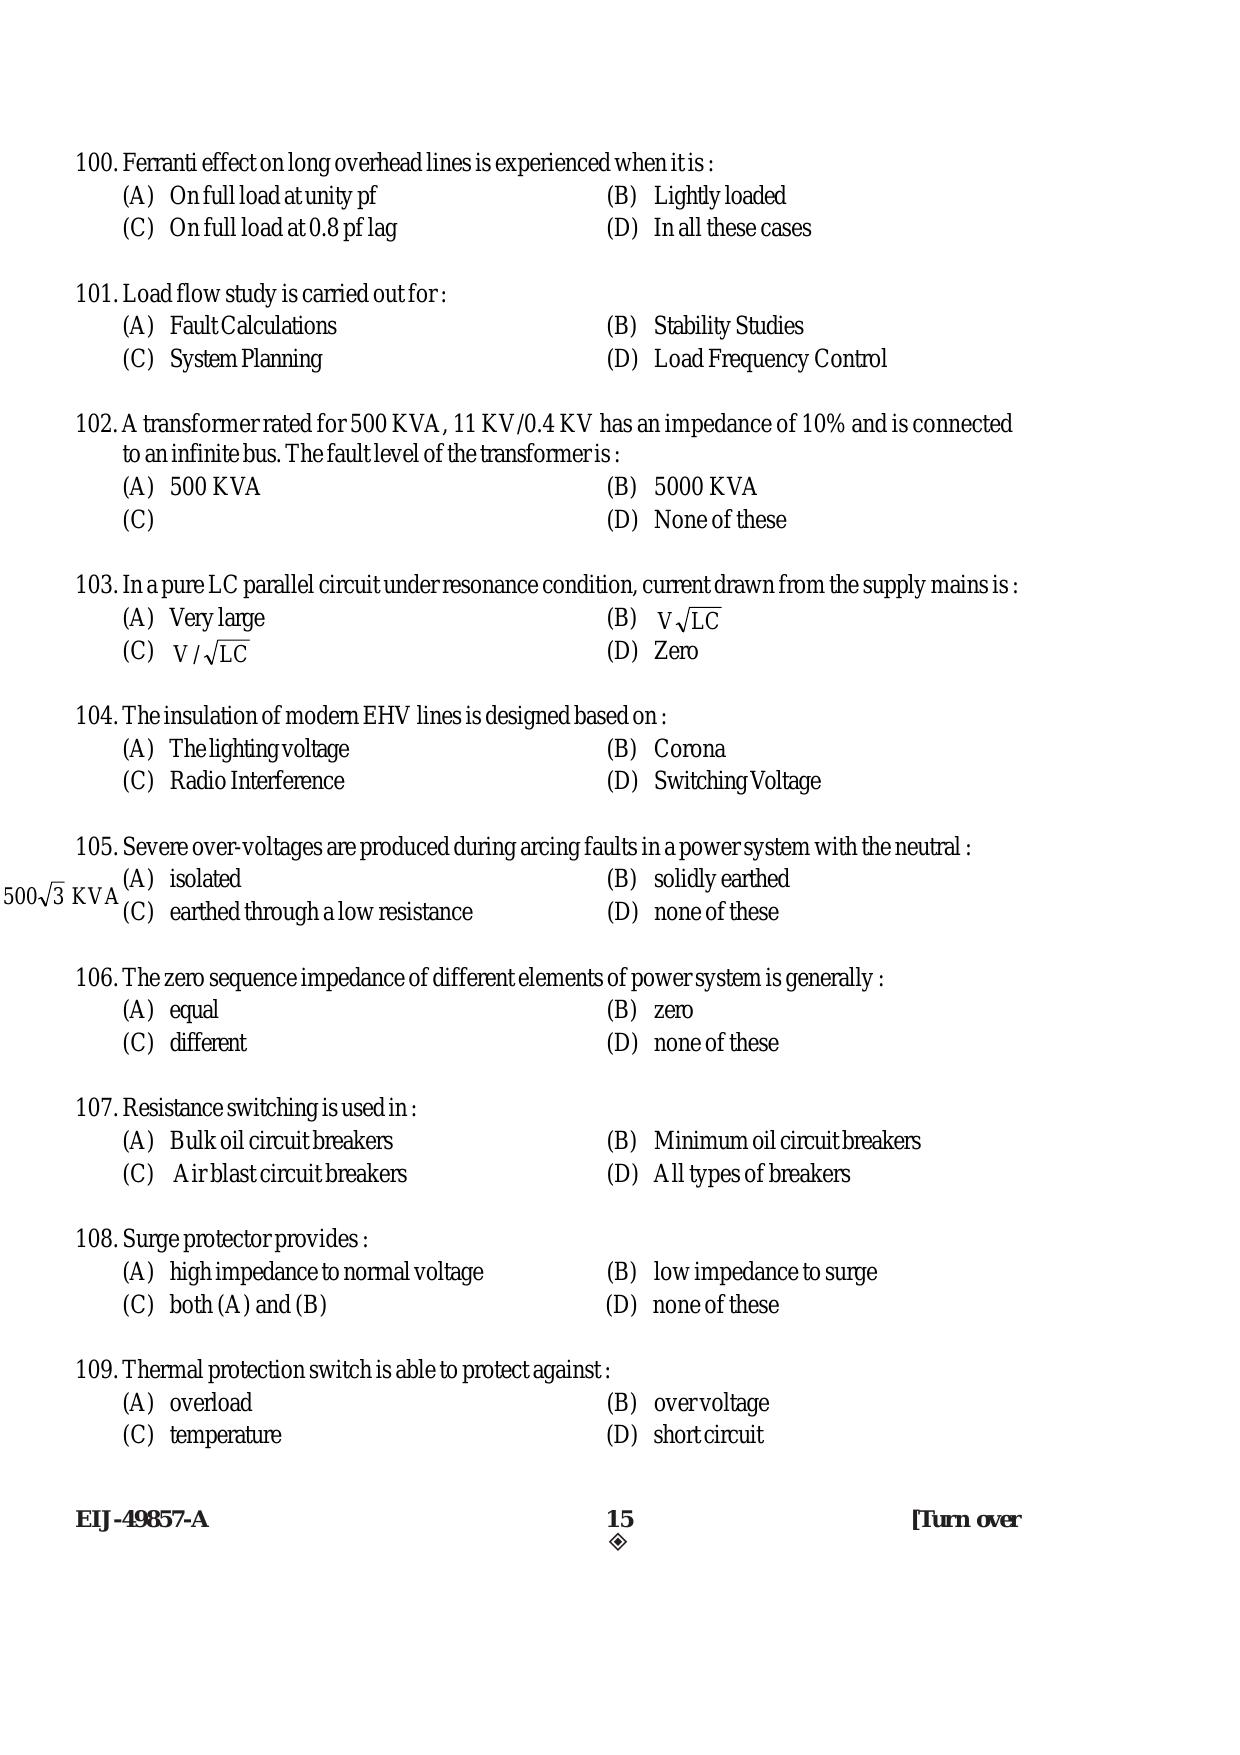 SEBI Officer Electrical Engineering Previous Paper - Page 15